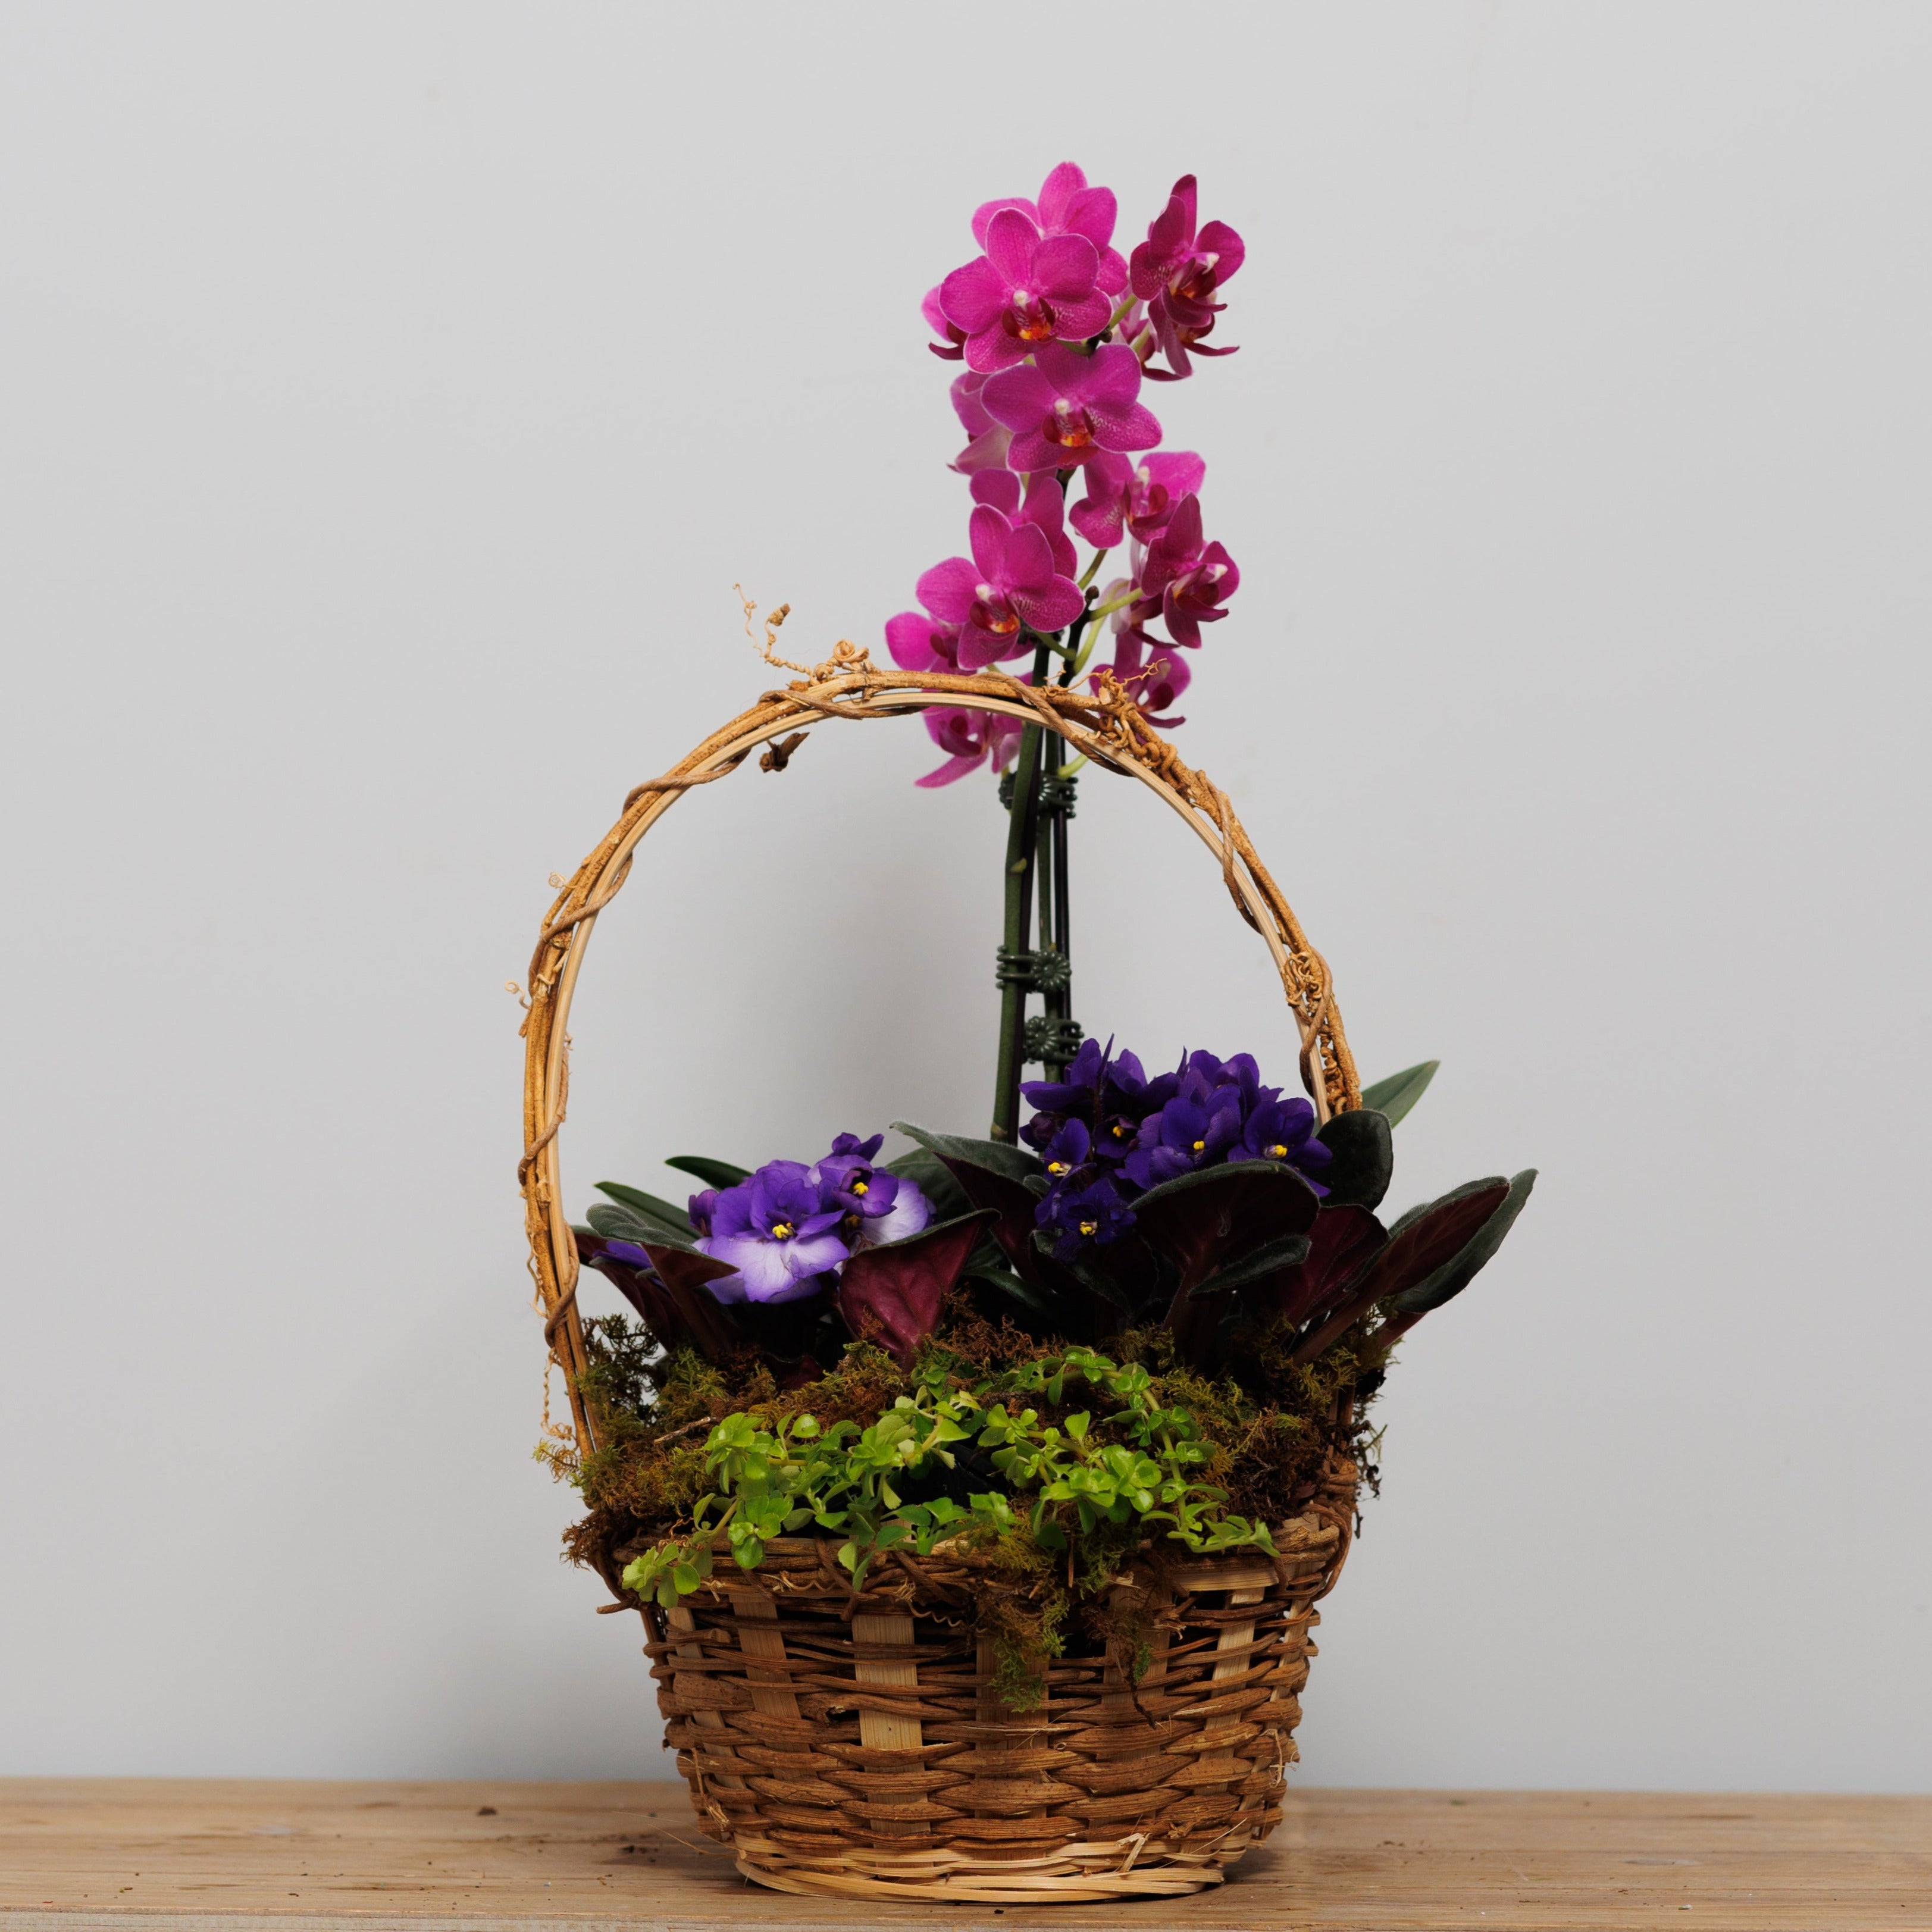 A mix of houseplants in a basket.